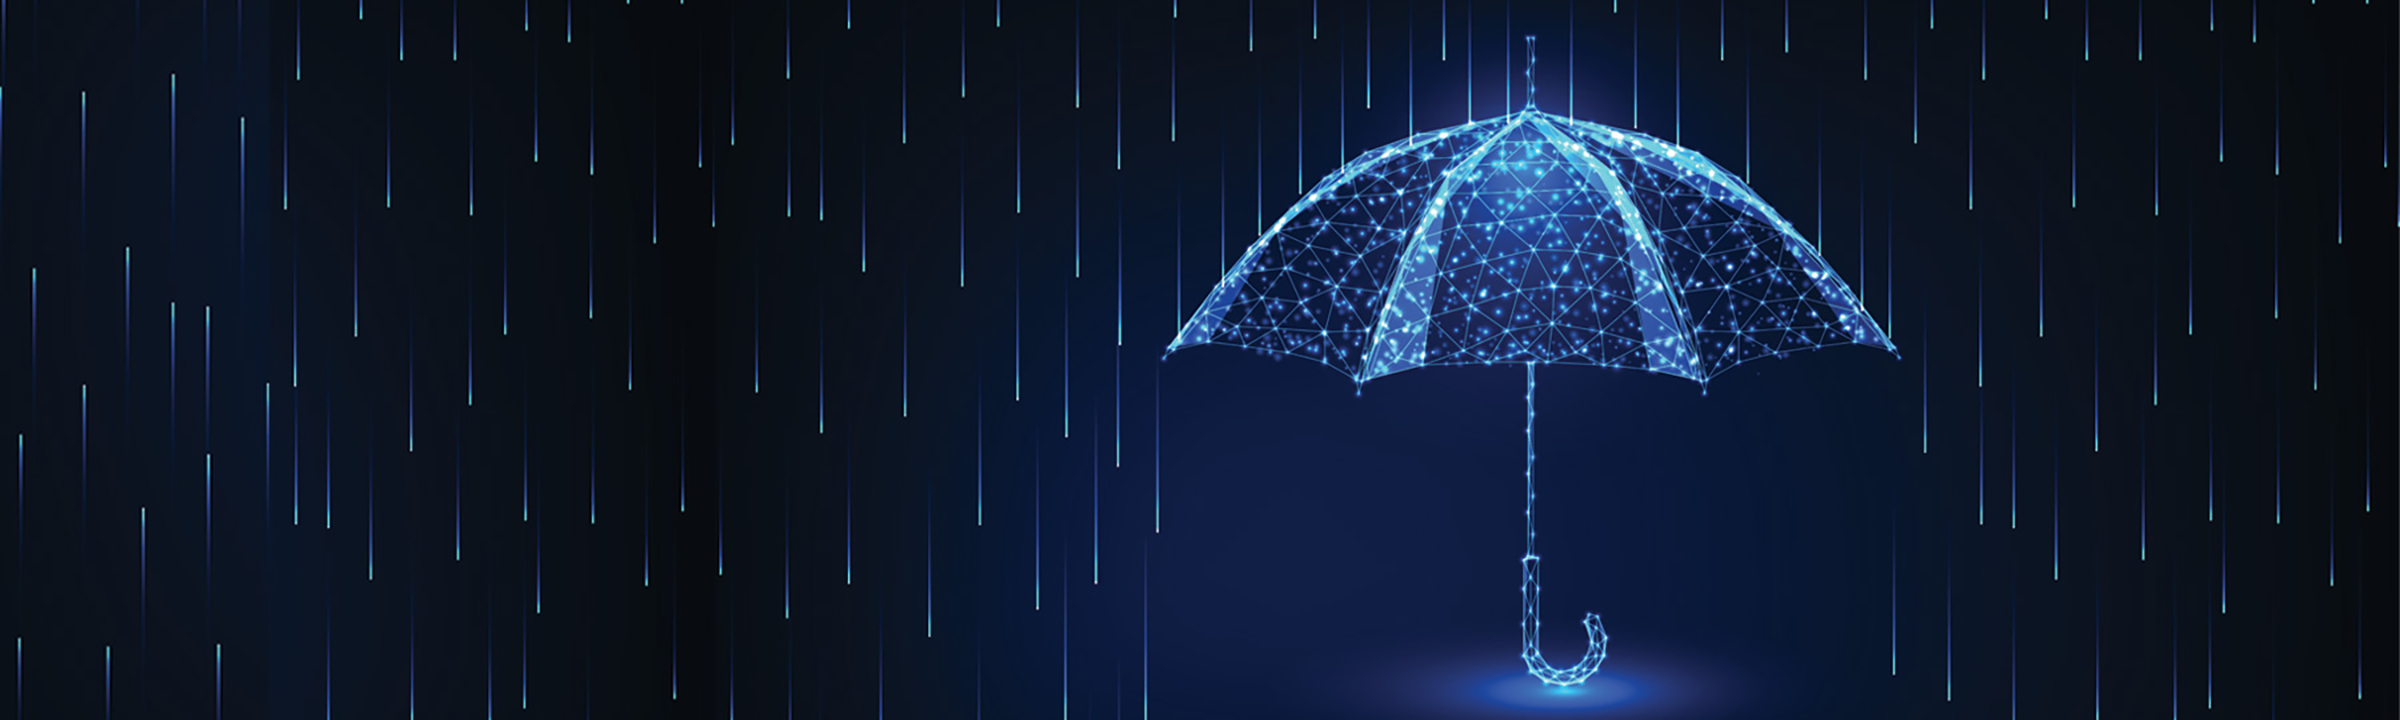 umbrella shield to protect of internet viruses as matrix code numbers falling above like a rain